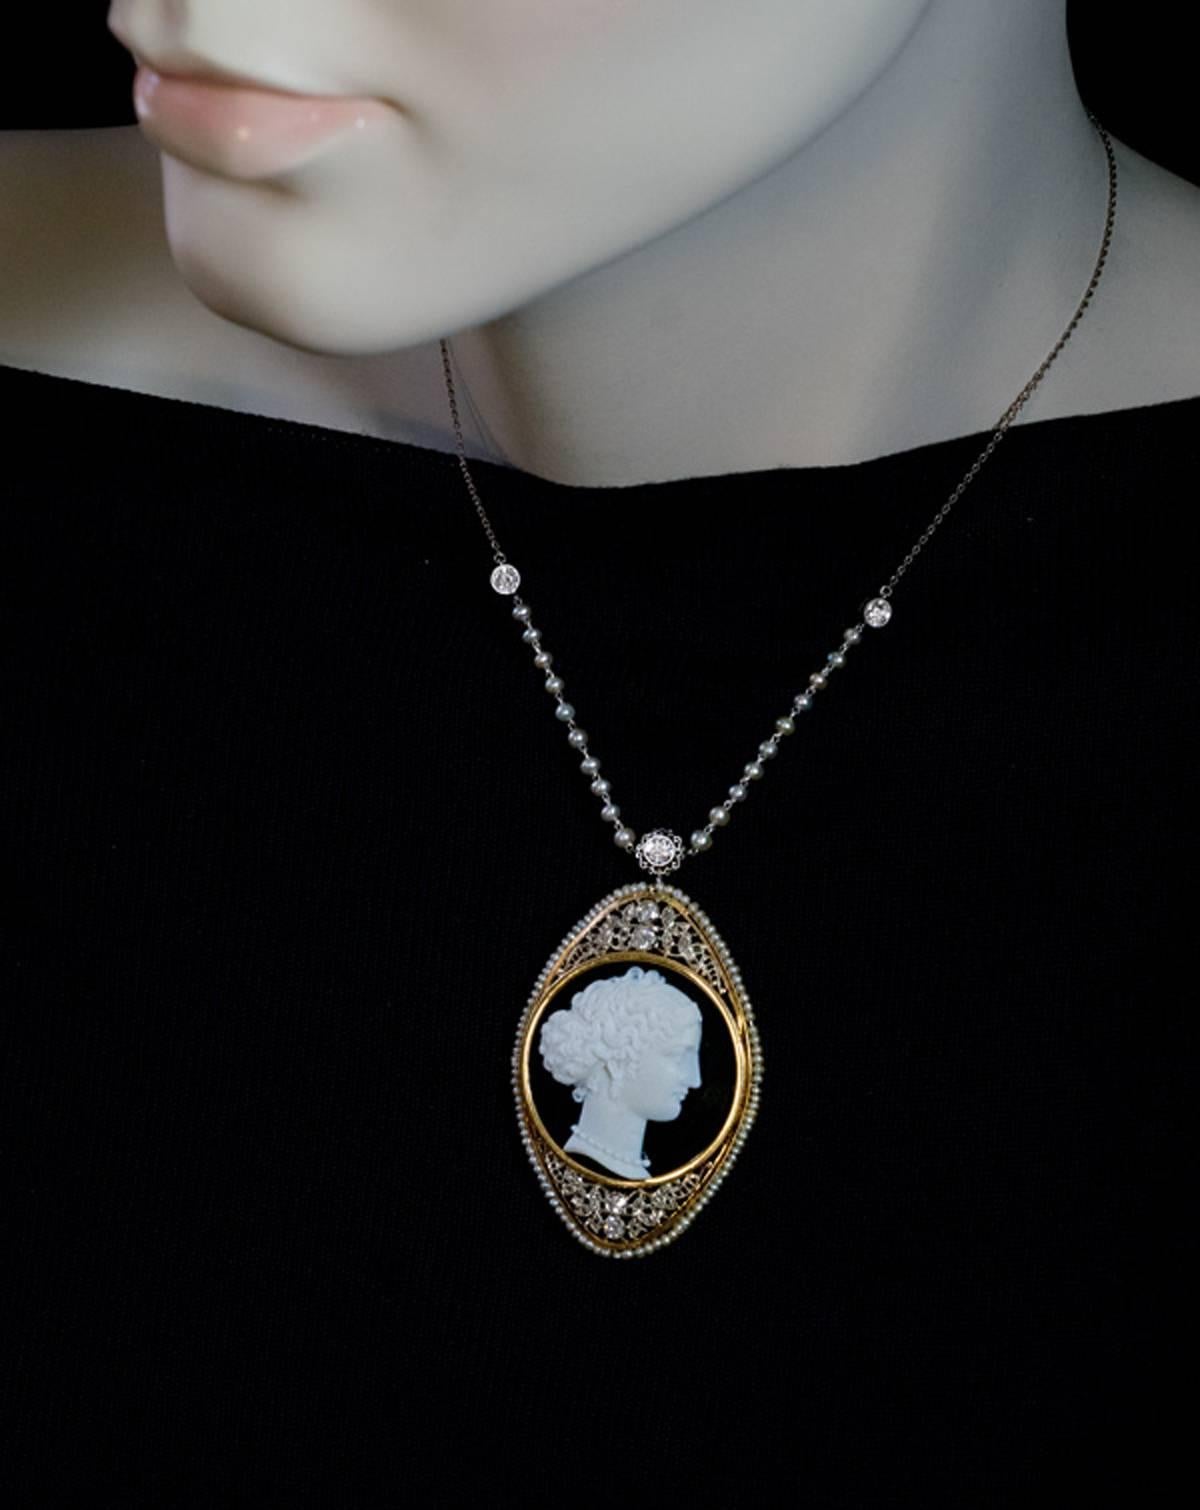 This superb Renaissance style antique diamond and seed pearl necklace features a black and white onyx (agate) cameo finely carved with a profile of a lady.  The cameo is set in an ornate 14K white and yellow gold openwork bezel embellished with